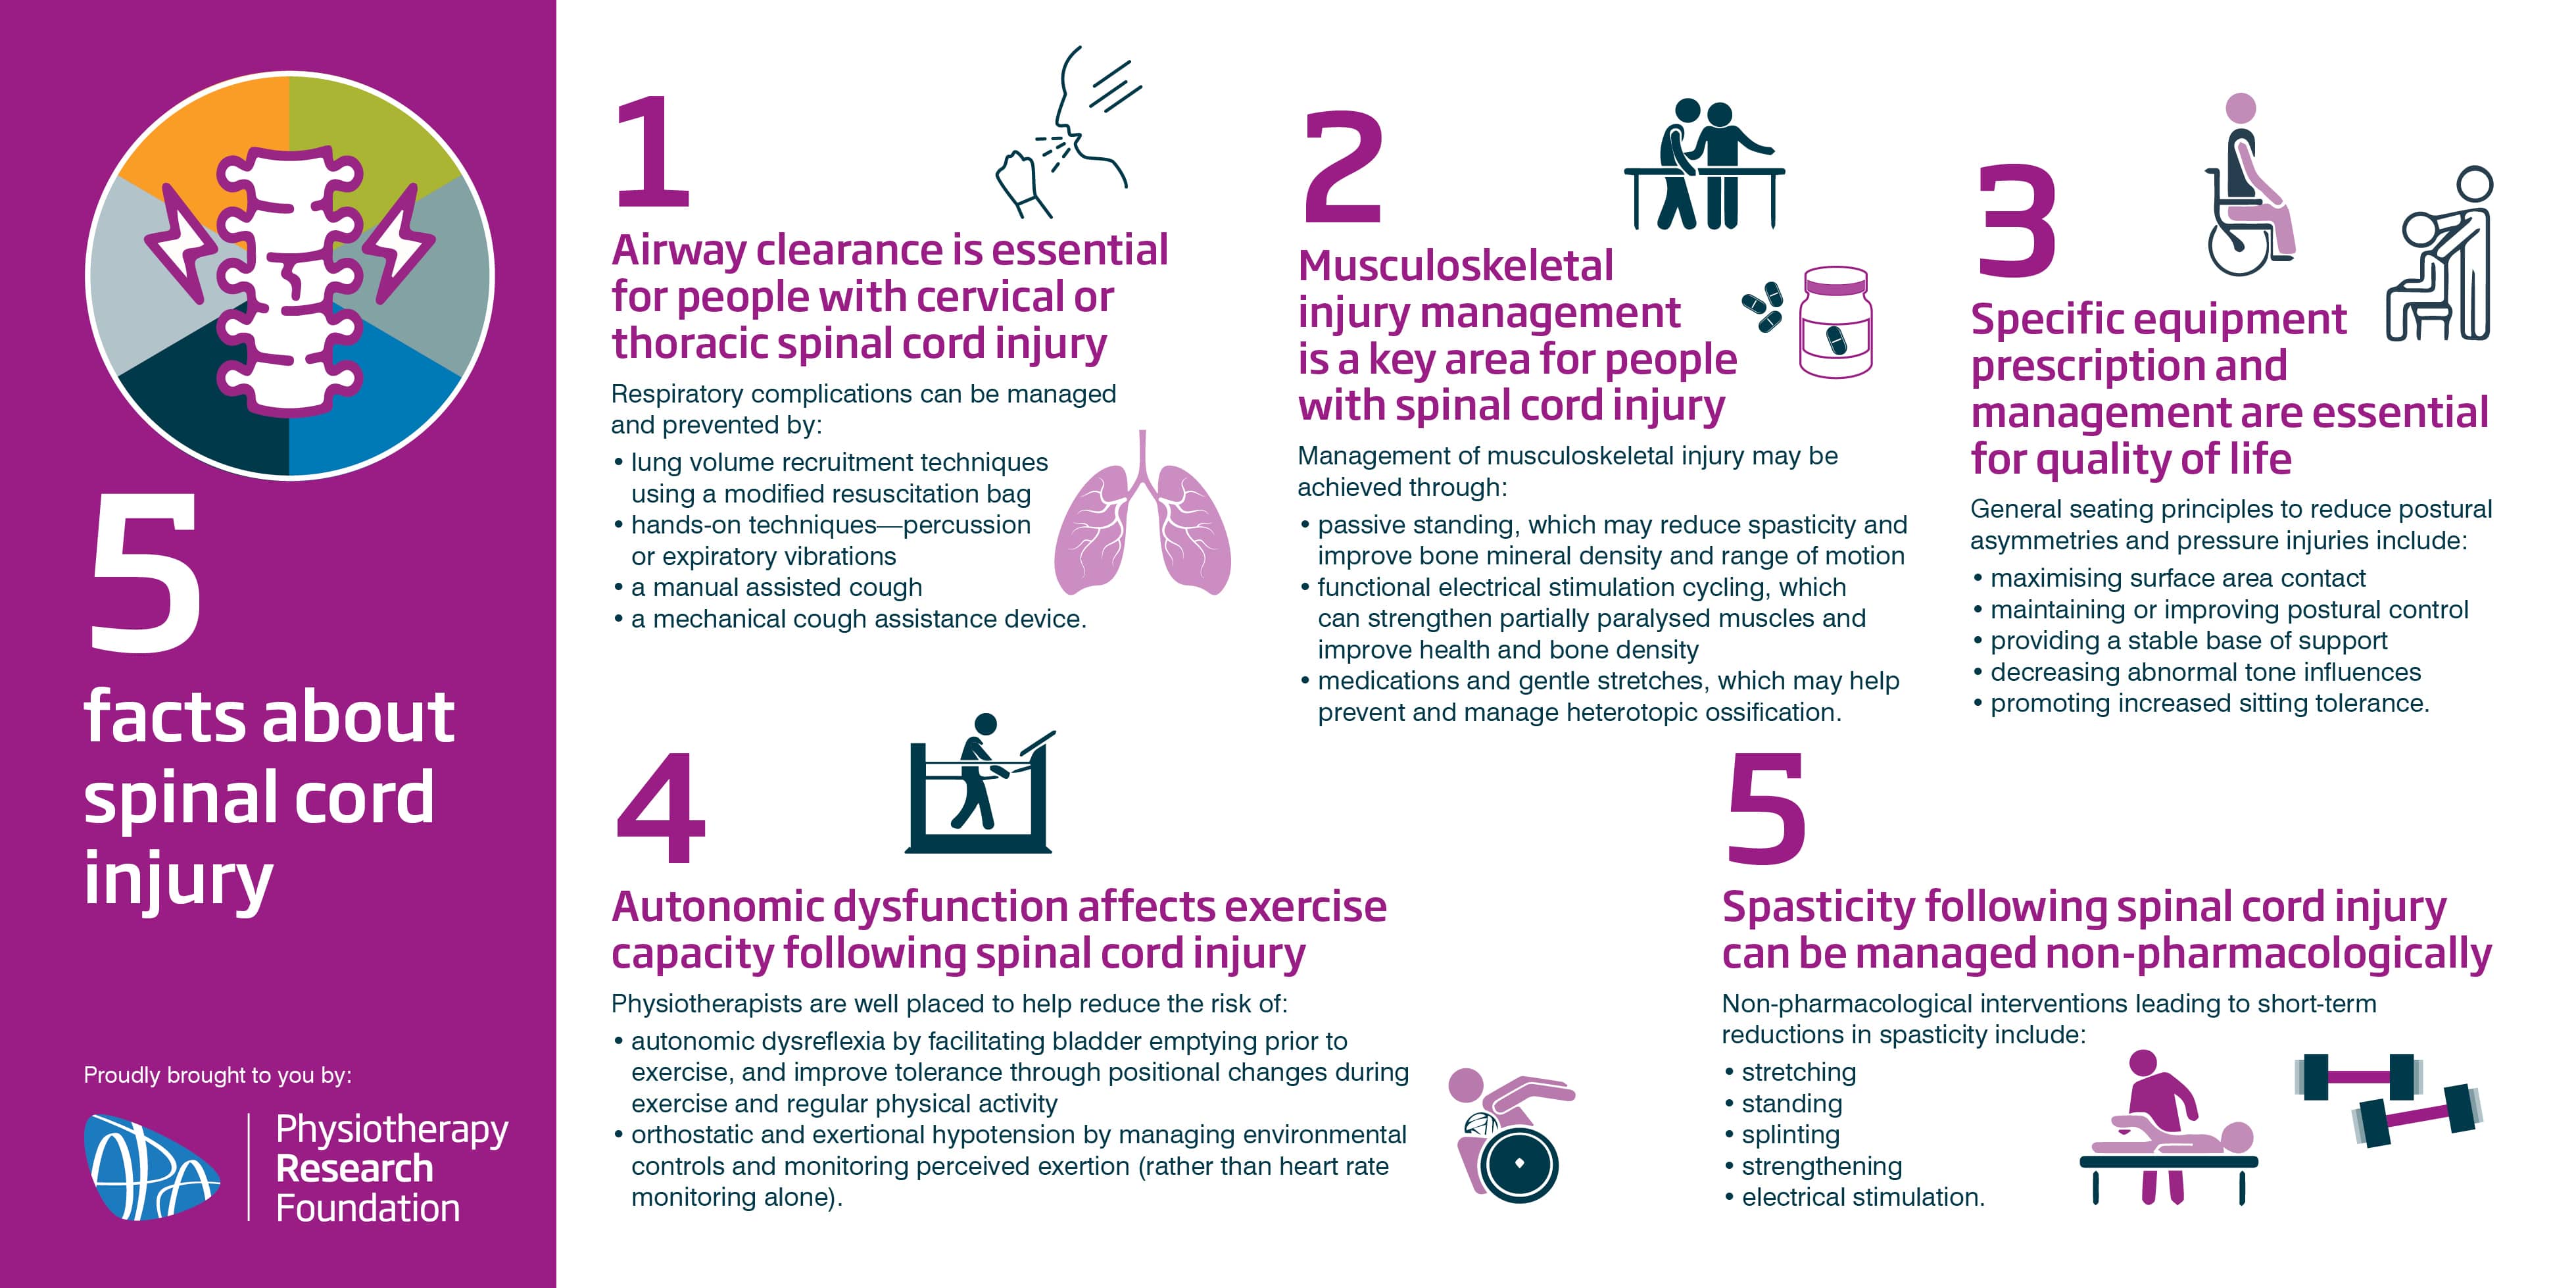 https://australian.physio/sites/default/files/RESEARCH%26PUBLICATIONS/PRF/PRF%3A%20Image%20library/10_Oct21_5_Facts_inforgraphics_Main_940x470-min.jpg